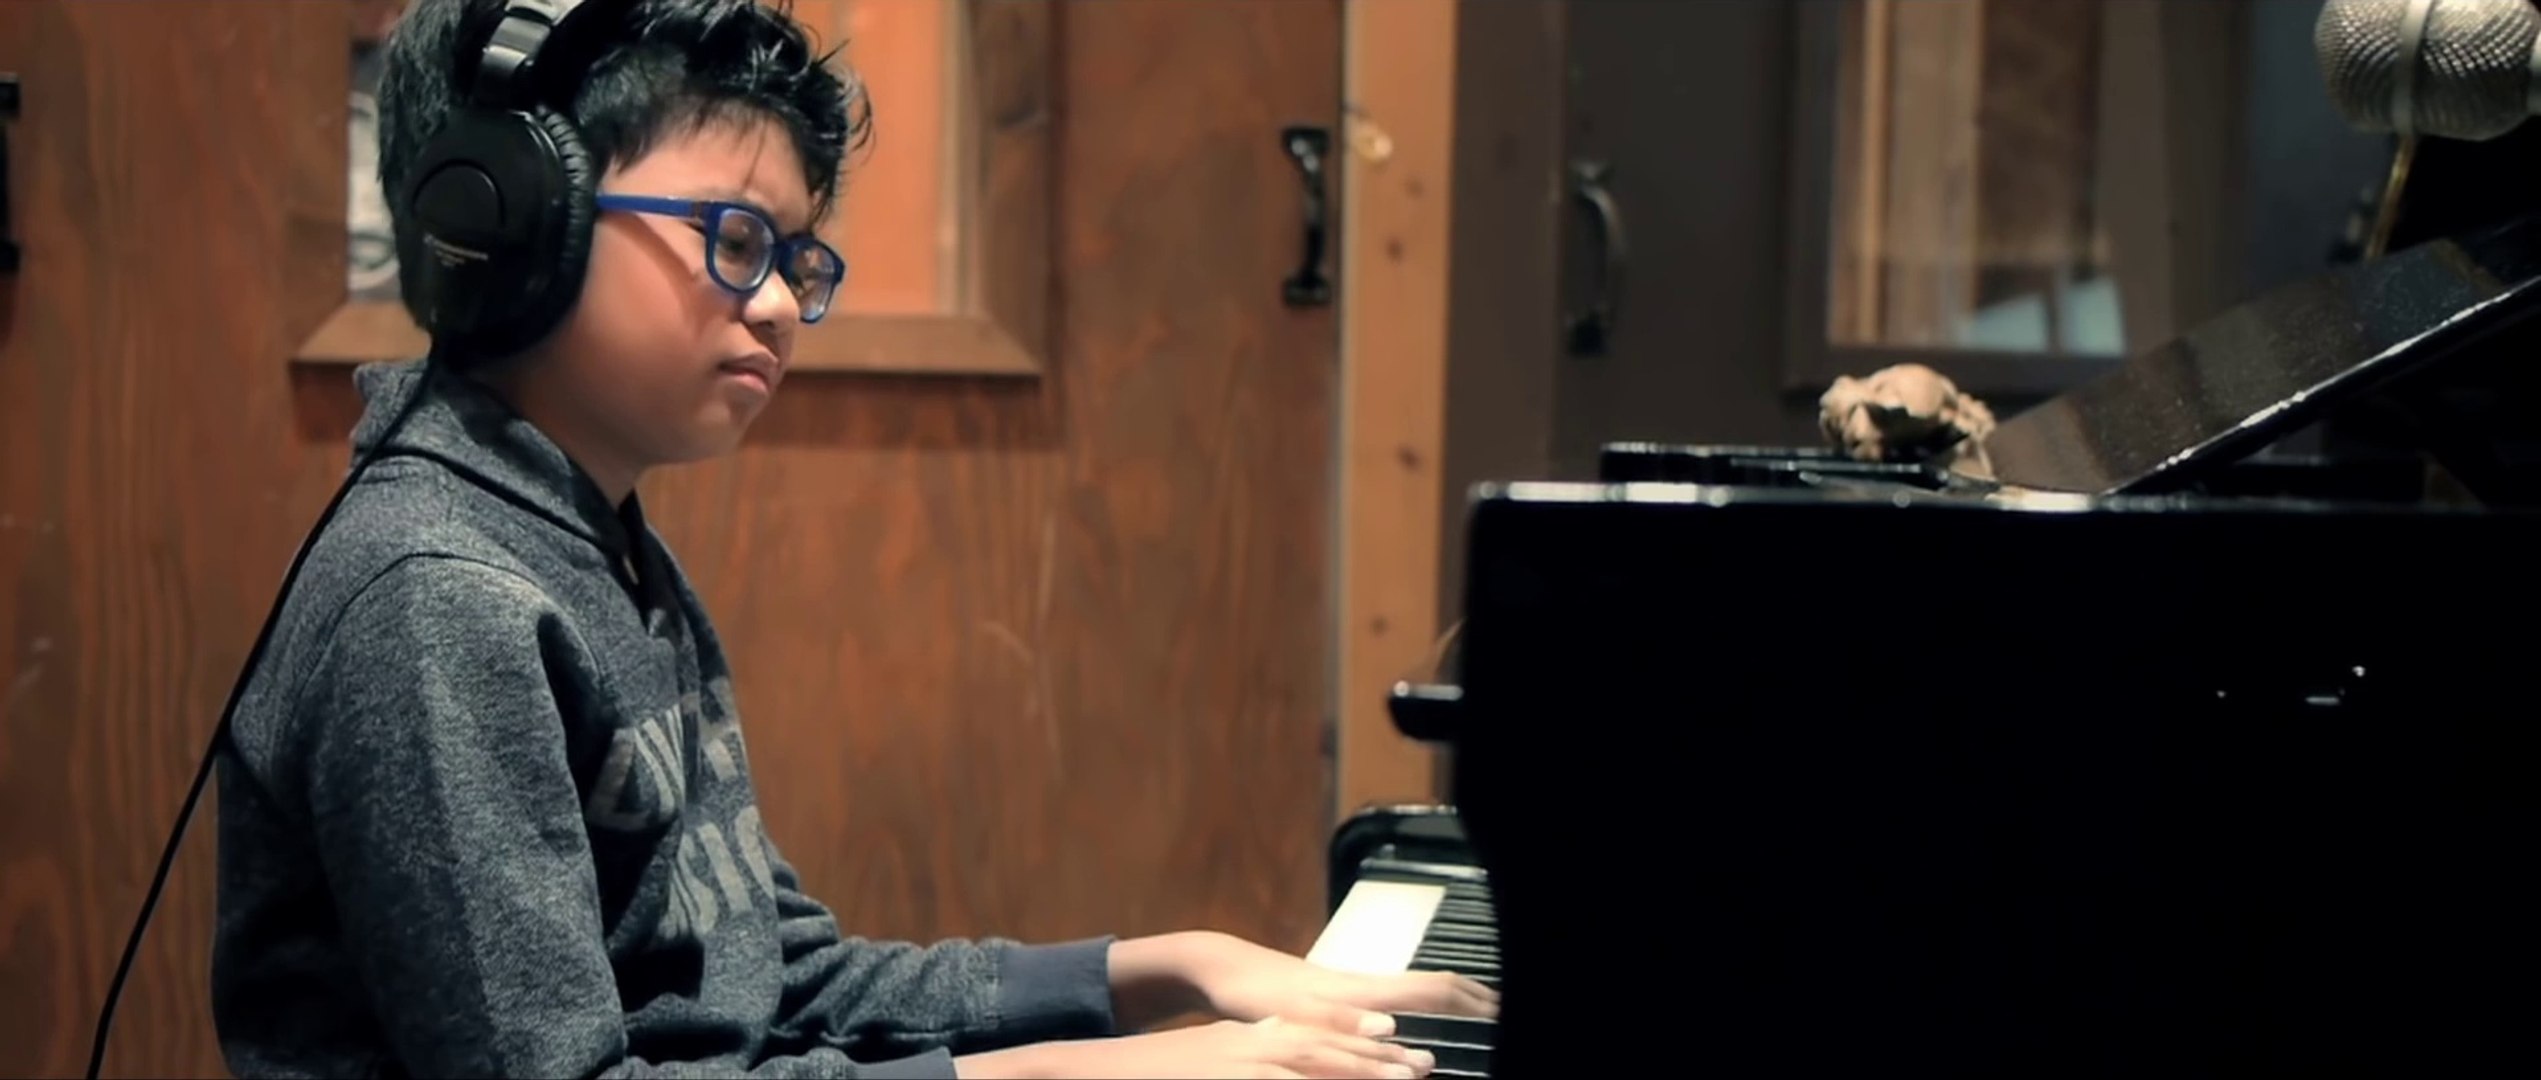 11 year old jazz pianist, Joey Alexander, is absolutely incredible - Vidéo  Dailymotion